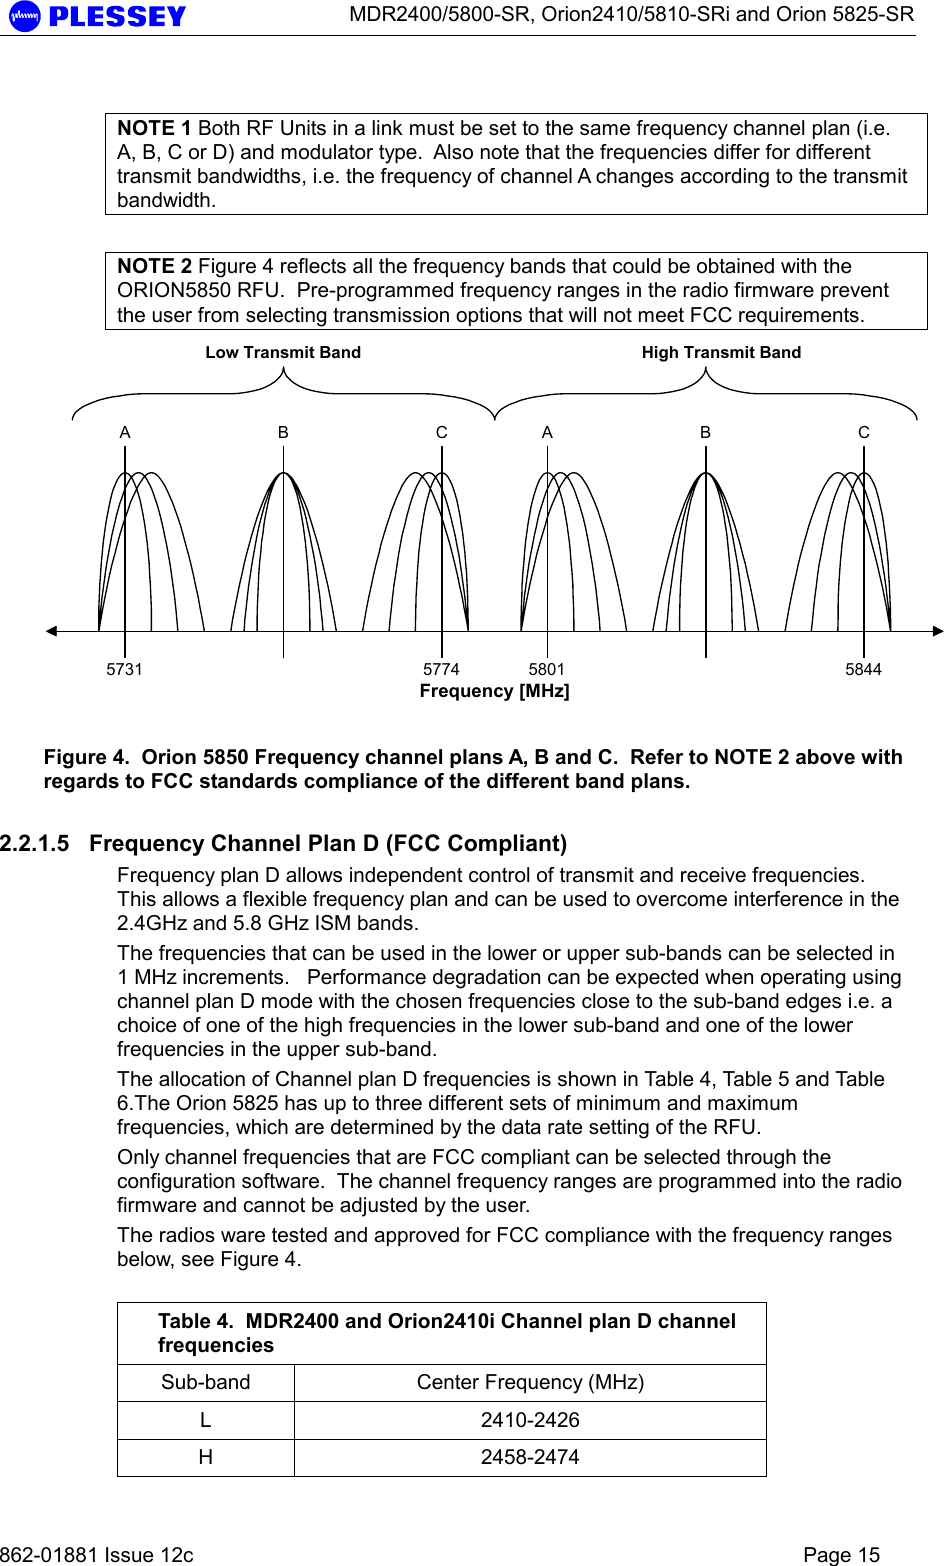      MDR2400/5800-SR, Orion2410/5810-SRi and Orion 5825-SR   862-01881 Issue 12c    Page 15  NOTE 1 Both RF Units in a link must be set to the same frequency channel plan (i.e. A, B, C or D) and modulator type.  Also note that the frequencies differ for different transmit bandwidths, i.e. the frequency of channel A changes according to the transmit bandwidth.  NOTE 2 Figure 4 reflects all the frequency bands that could be obtained with the ORION5850 RFU.  Pre-programmed frequency ranges in the radio firmware prevent the user from selecting transmission options that will not meet FCC requirements. Frequency [MHz]5731 5774 5801 5844ABCABCLow Transmit Band High Transmit Band Figure 4.  Orion 5850 Frequency channel plans A, B and C.  Refer to NOTE 2 above with regards to FCC standards compliance of the different band plans. 2.2.1.5  Frequency Channel Plan D (FCC Compliant) Frequency plan D allows independent control of transmit and receive frequencies.  This allows a flexible frequency plan and can be used to overcome interference in the 2.4GHz and 5.8 GHz ISM bands. The frequencies that can be used in the lower or upper sub-bands can be selected in 1 MHz increments.   Performance degradation can be expected when operating using channel plan D mode with the chosen frequencies close to the sub-band edges i.e. a choice of one of the high frequencies in the lower sub-band and one of the lower frequencies in the upper sub-band.    The allocation of Channel plan D frequencies is shown in Table 4, Table 5 and Table 6.The Orion 5825 has up to three different sets of minimum and maximum frequencies, which are determined by the data rate setting of the RFU. Only channel frequencies that are FCC compliant can be selected through the configuration software.  The channel frequency ranges are programmed into the radio firmware and cannot be adjusted by the user. The radios ware tested and approved for FCC compliance with the frequency ranges below, see Figure 4.  Table 4.  MDR2400 and Orion2410i Channel plan D channel frequencies Sub-band  Center Frequency (MHz) L 2410-2426 H 2458-2474 